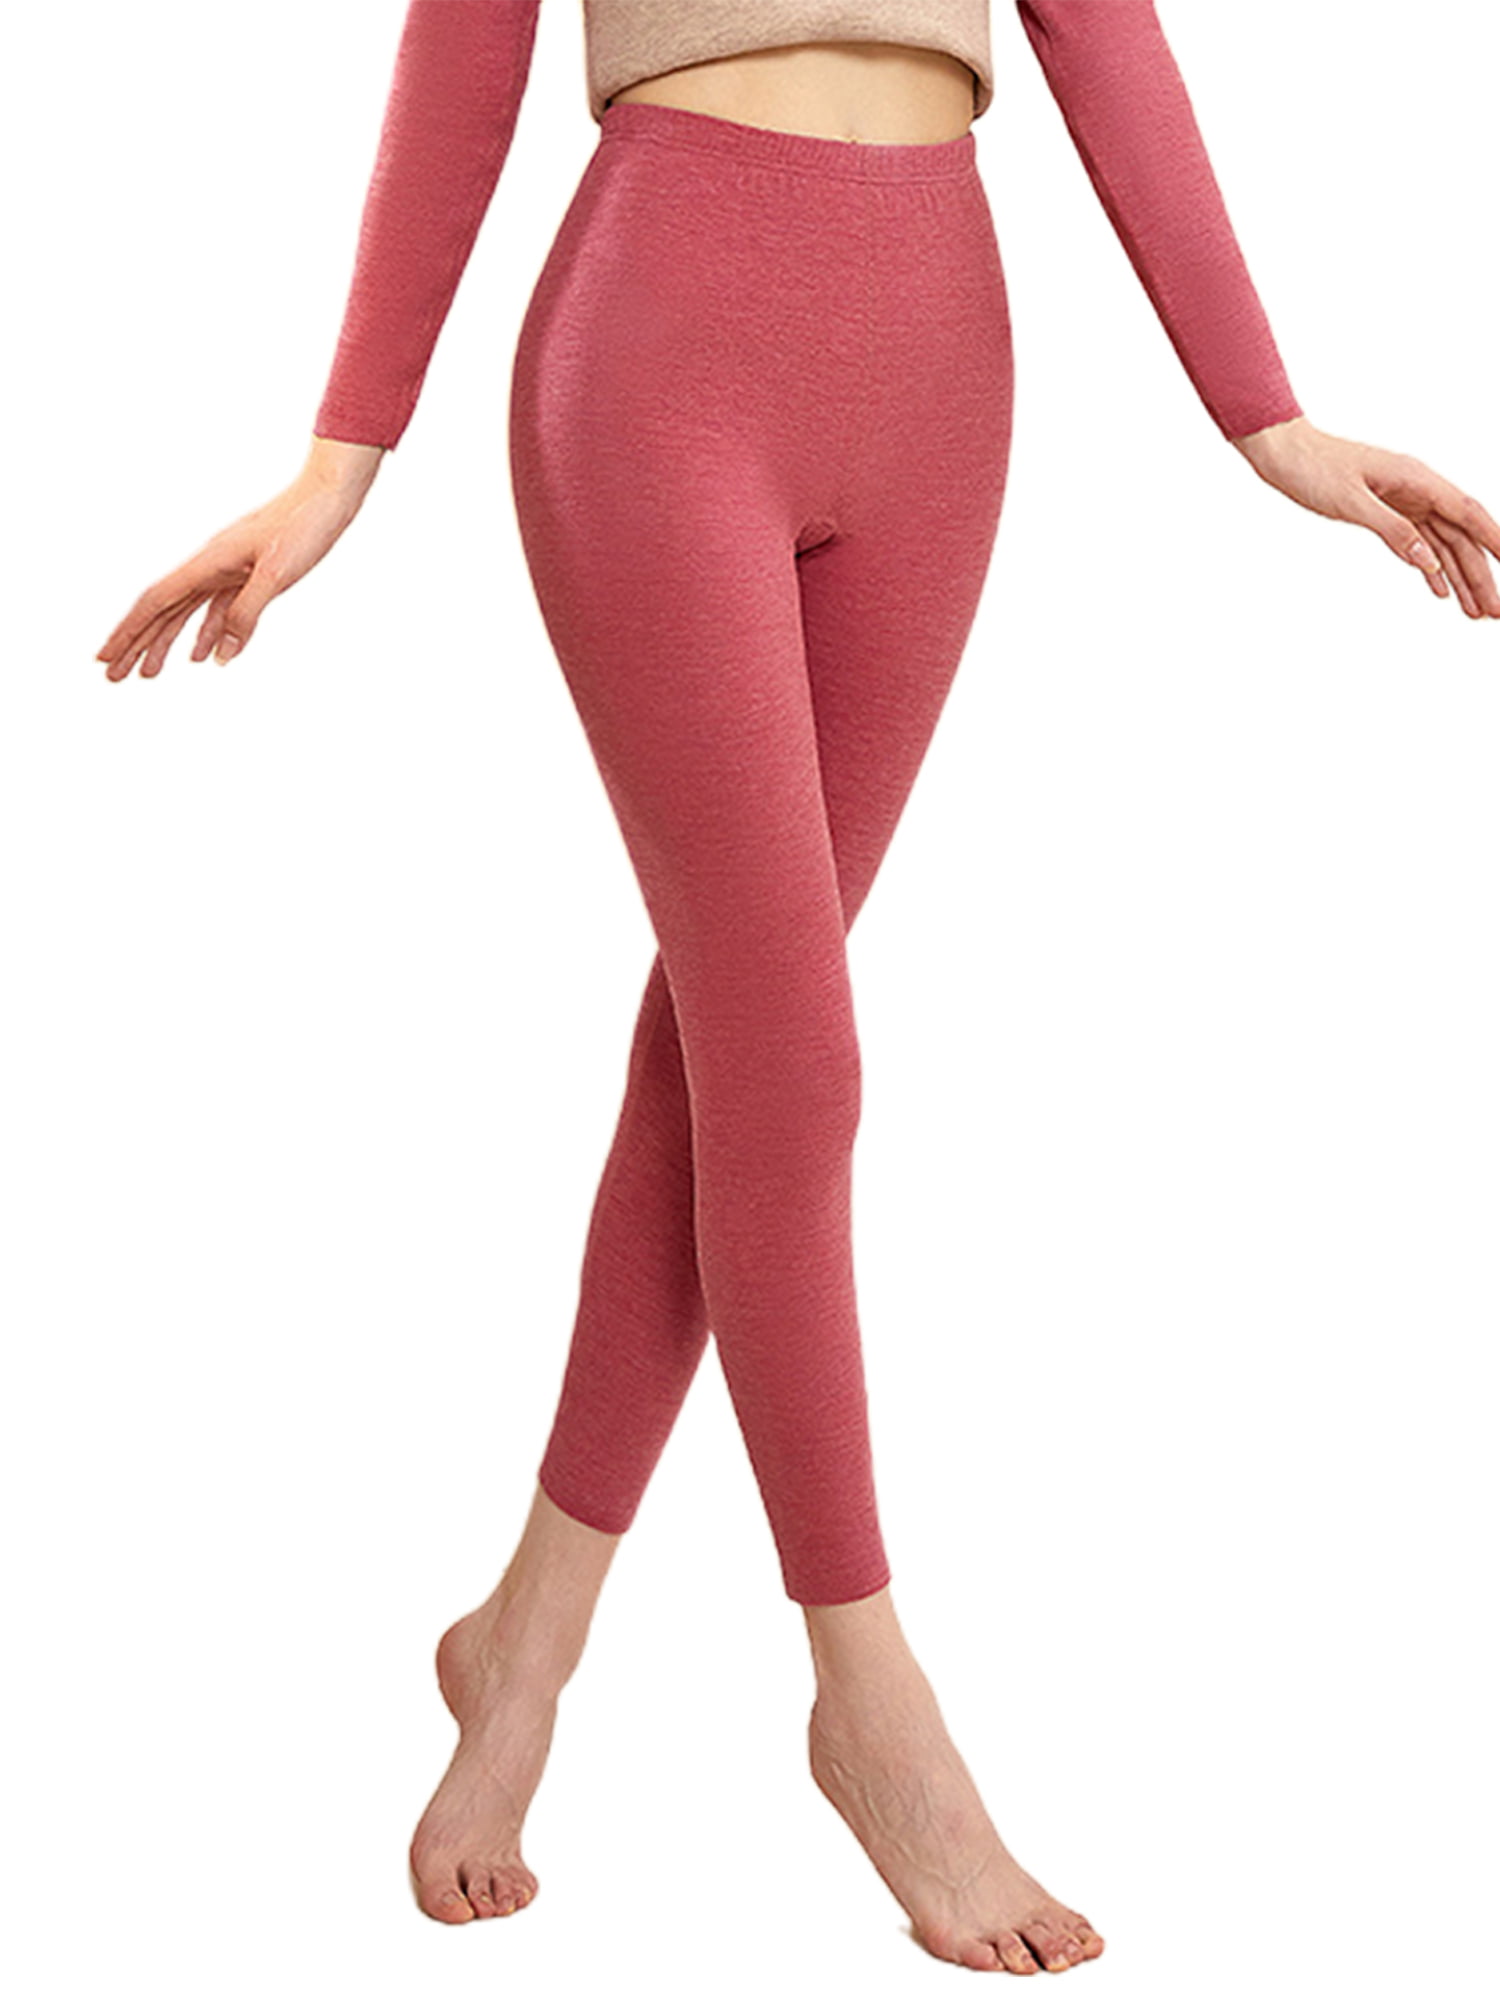 Capreze Solid Color Top And Bottom Long Johns for Women Ultra Soft